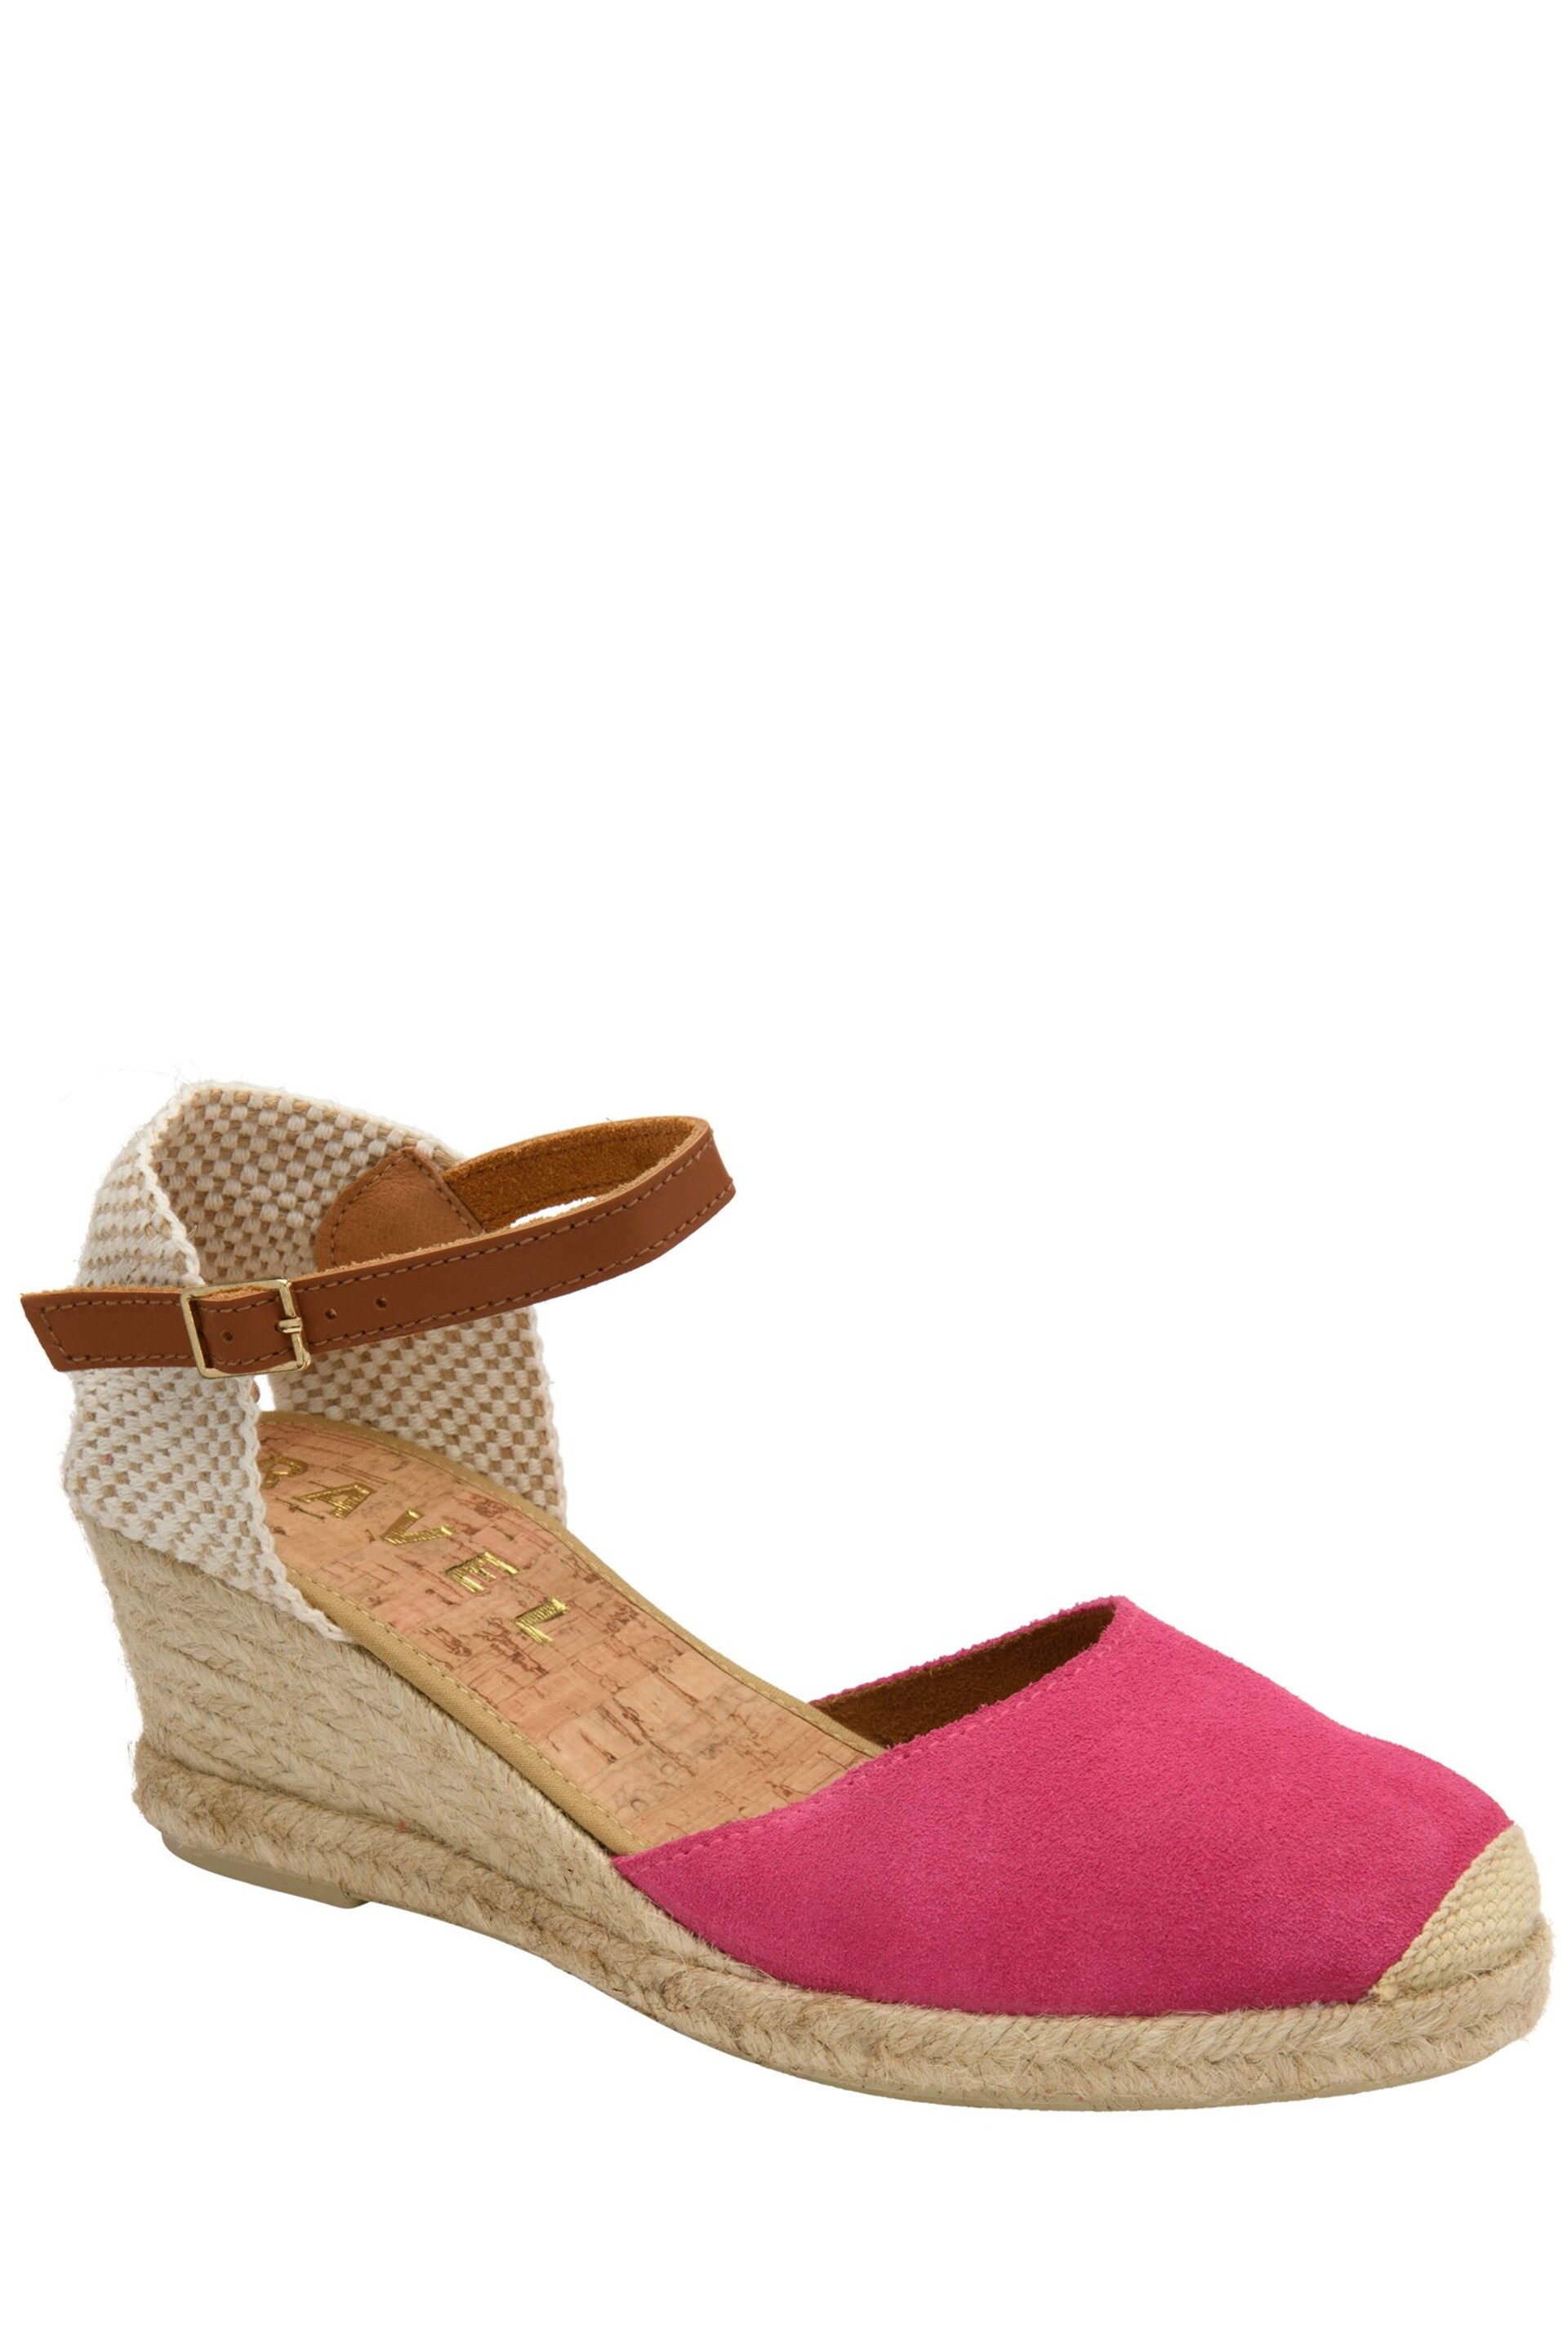 Ravel Pink Suede Leather Espadrilles On A Rope Wedges Unit - Image 1 of 4